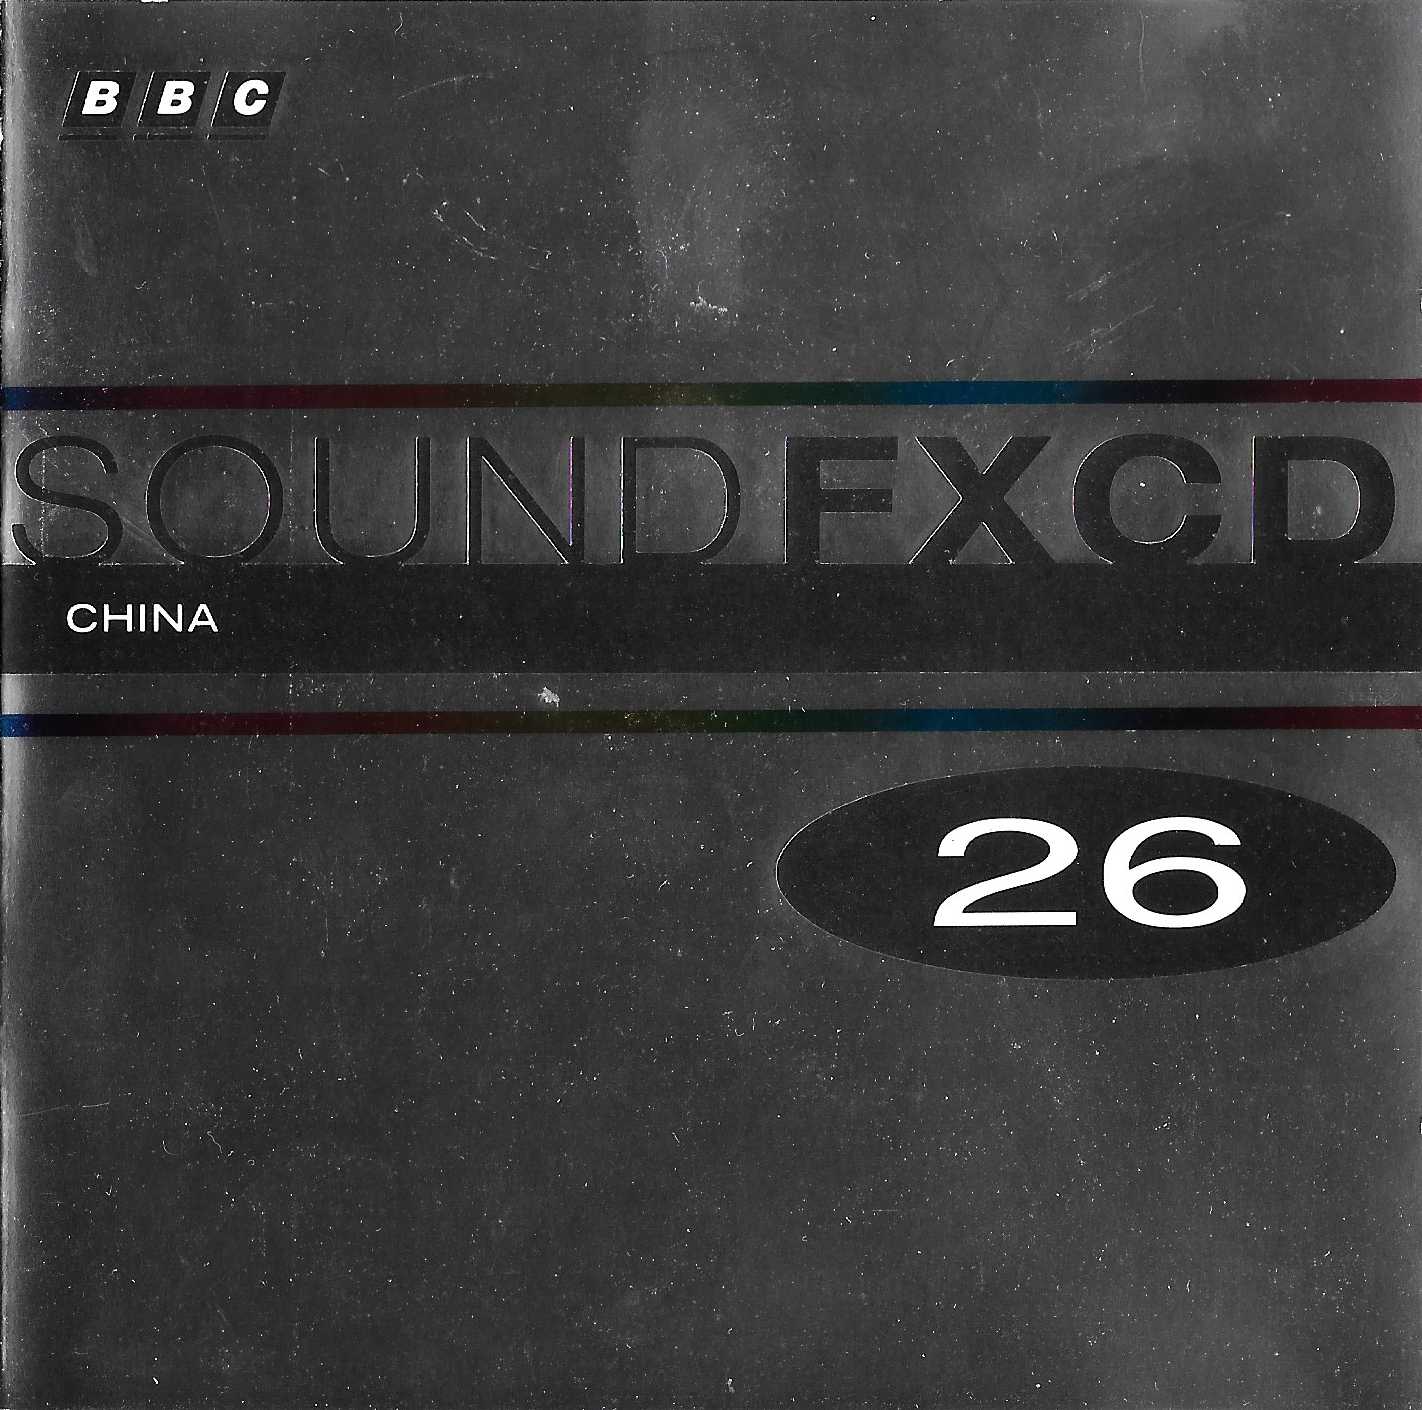 Picture of BBCCD SFX026 China by artist Various from the BBC cds - Records and Tapes library